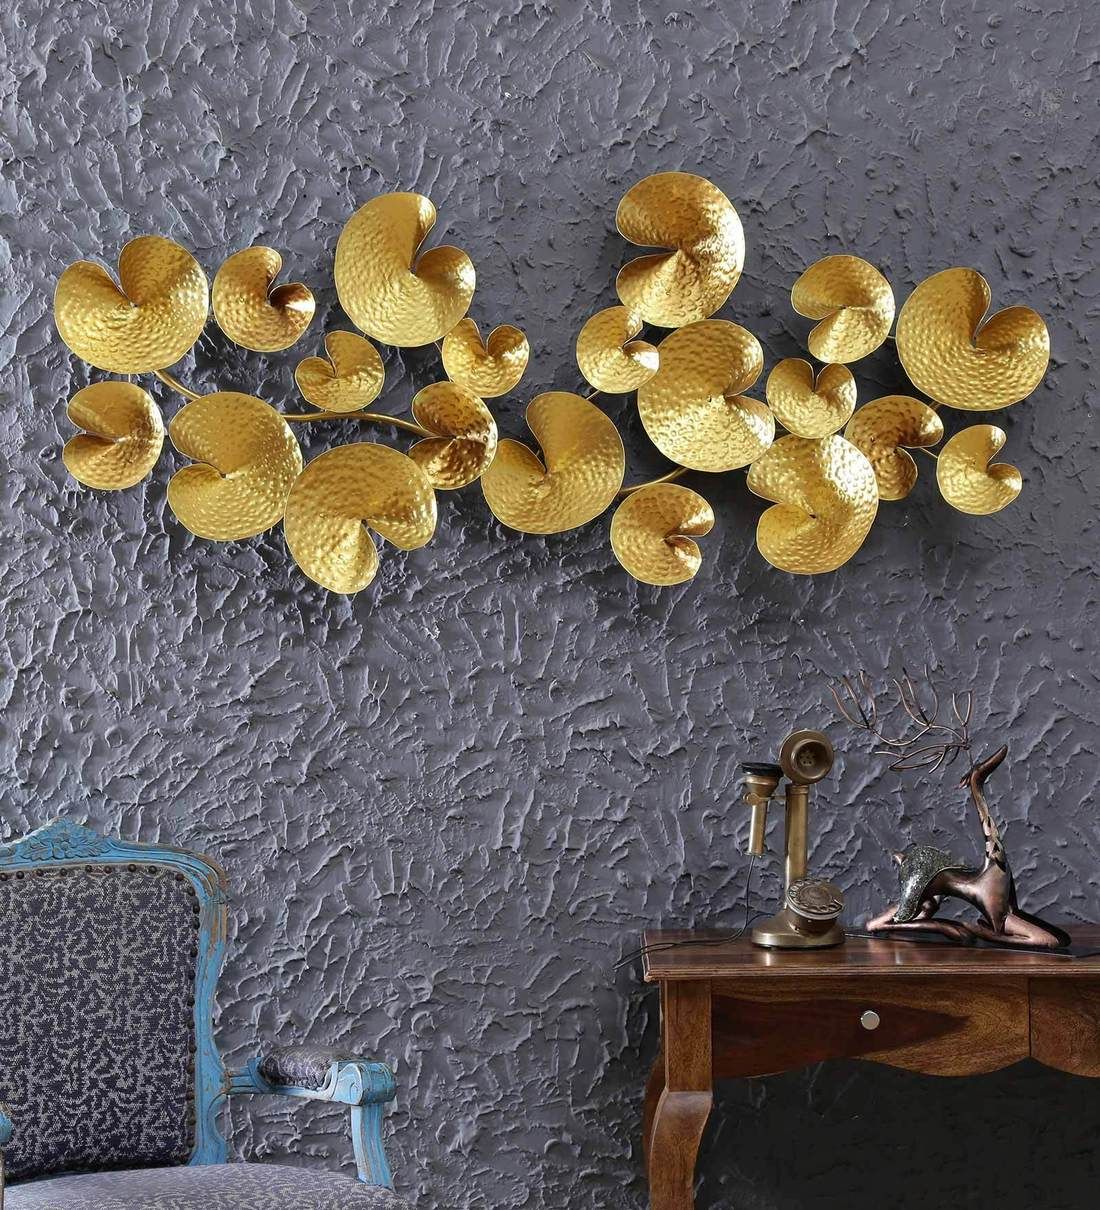 Buy Wrought Iron Abstract Wall Art In Goldmalik Design Online –  Abstract Metal Art – Metal Wall Art – Home Decor – Pepperfry Product Intended For Golden Wall Art (View 12 of 15)